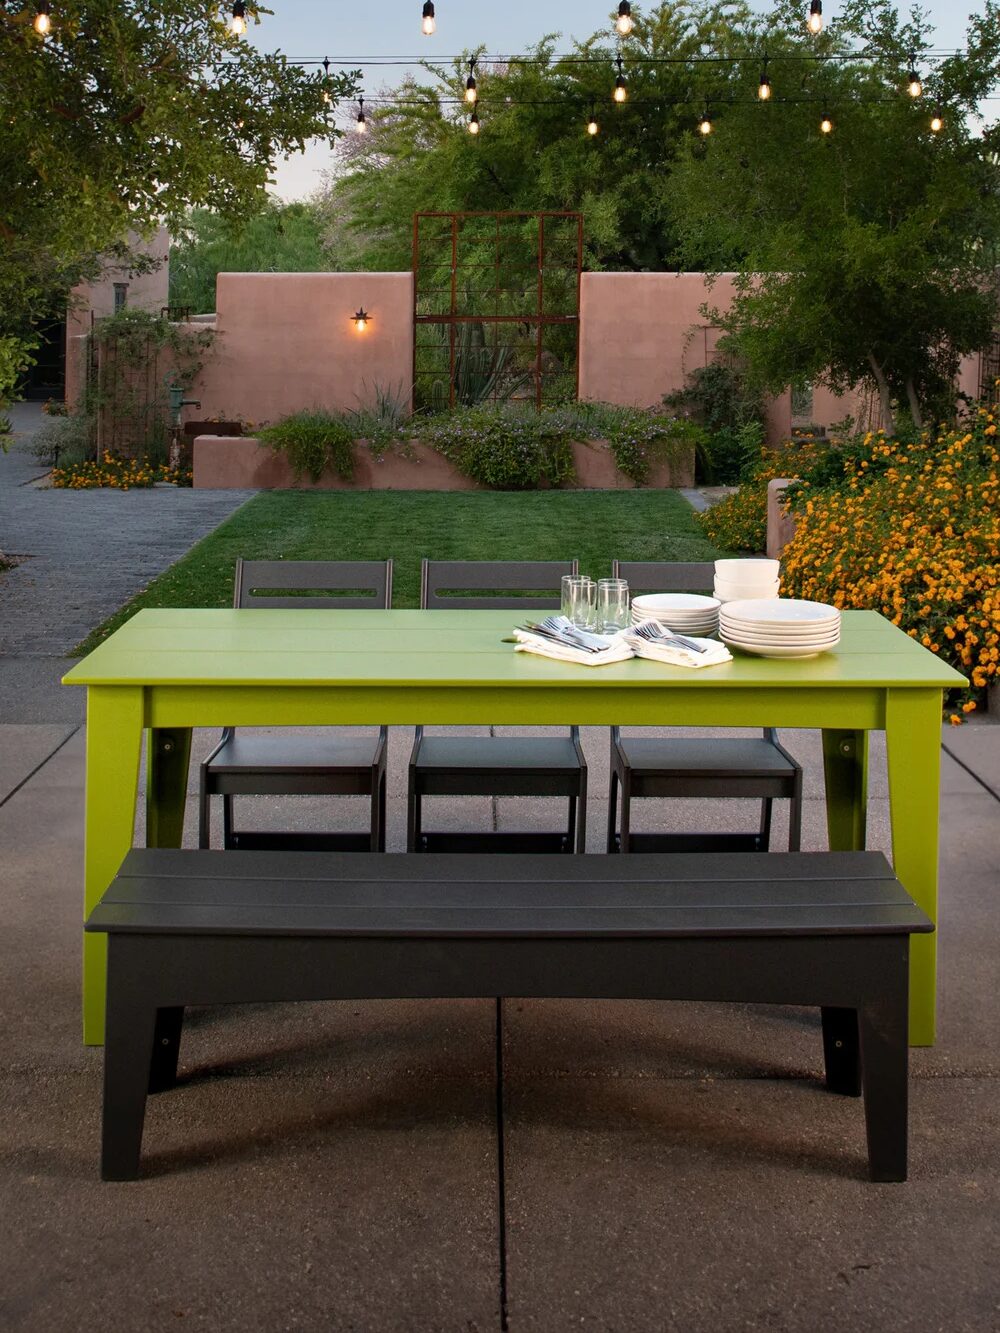 Outdoor dining area with a lime green table, black bench, and three chairs set in a garden patio. String lights hang above, and the table holds stacked plates and glasses. Bushes and greenery surround the setup.